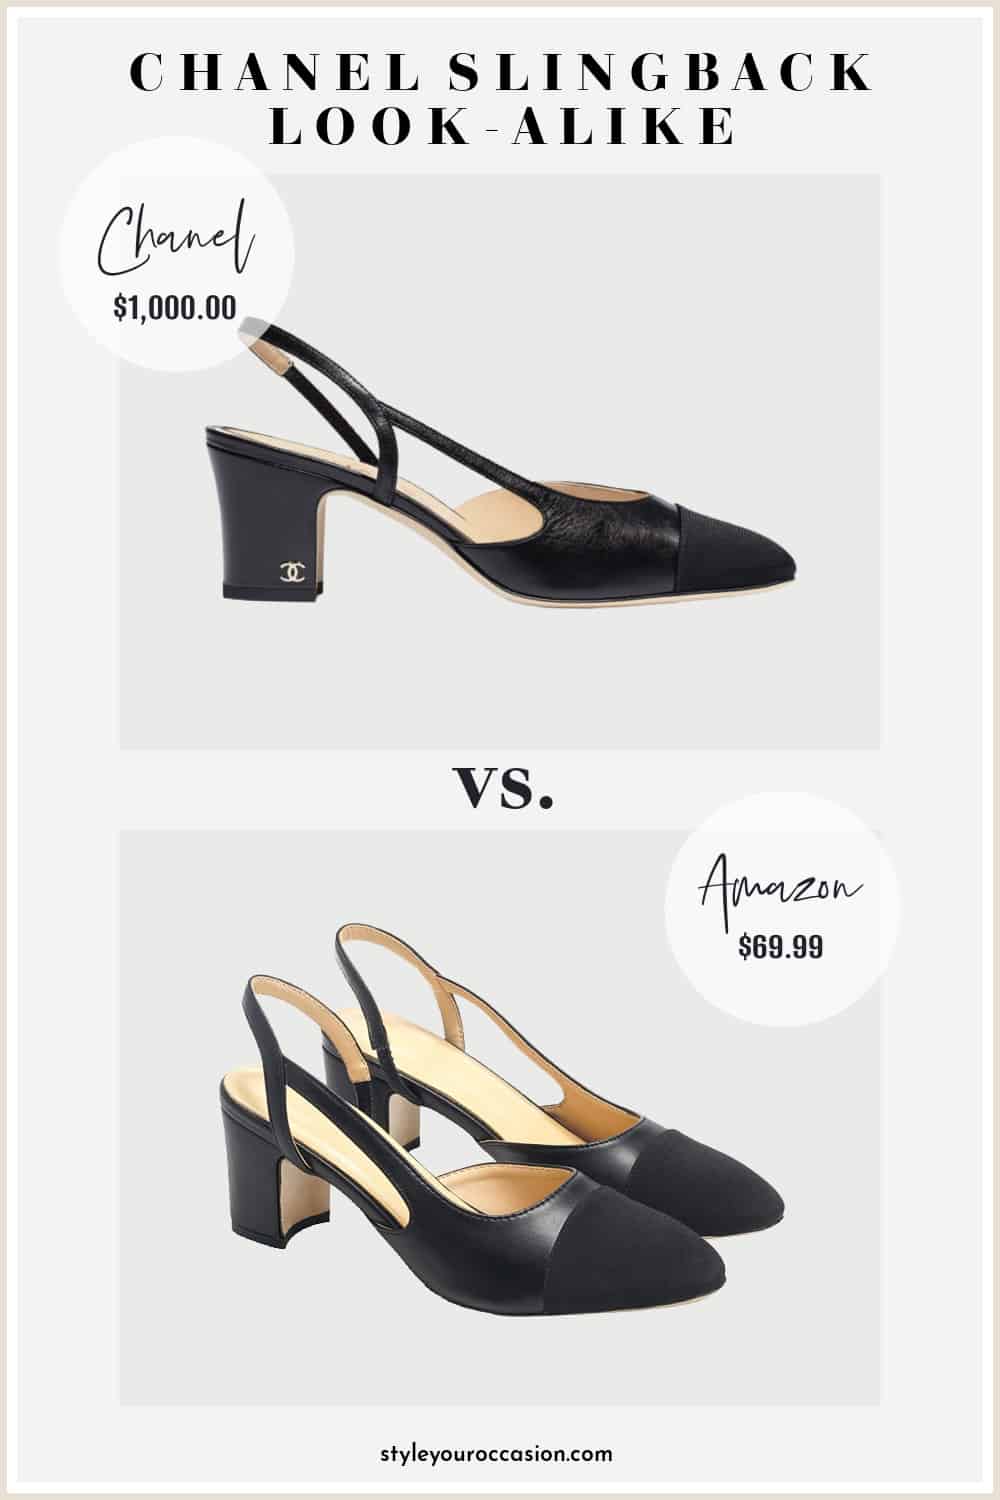 image comparing a black Chanel slingback pump with a look-alike shoe